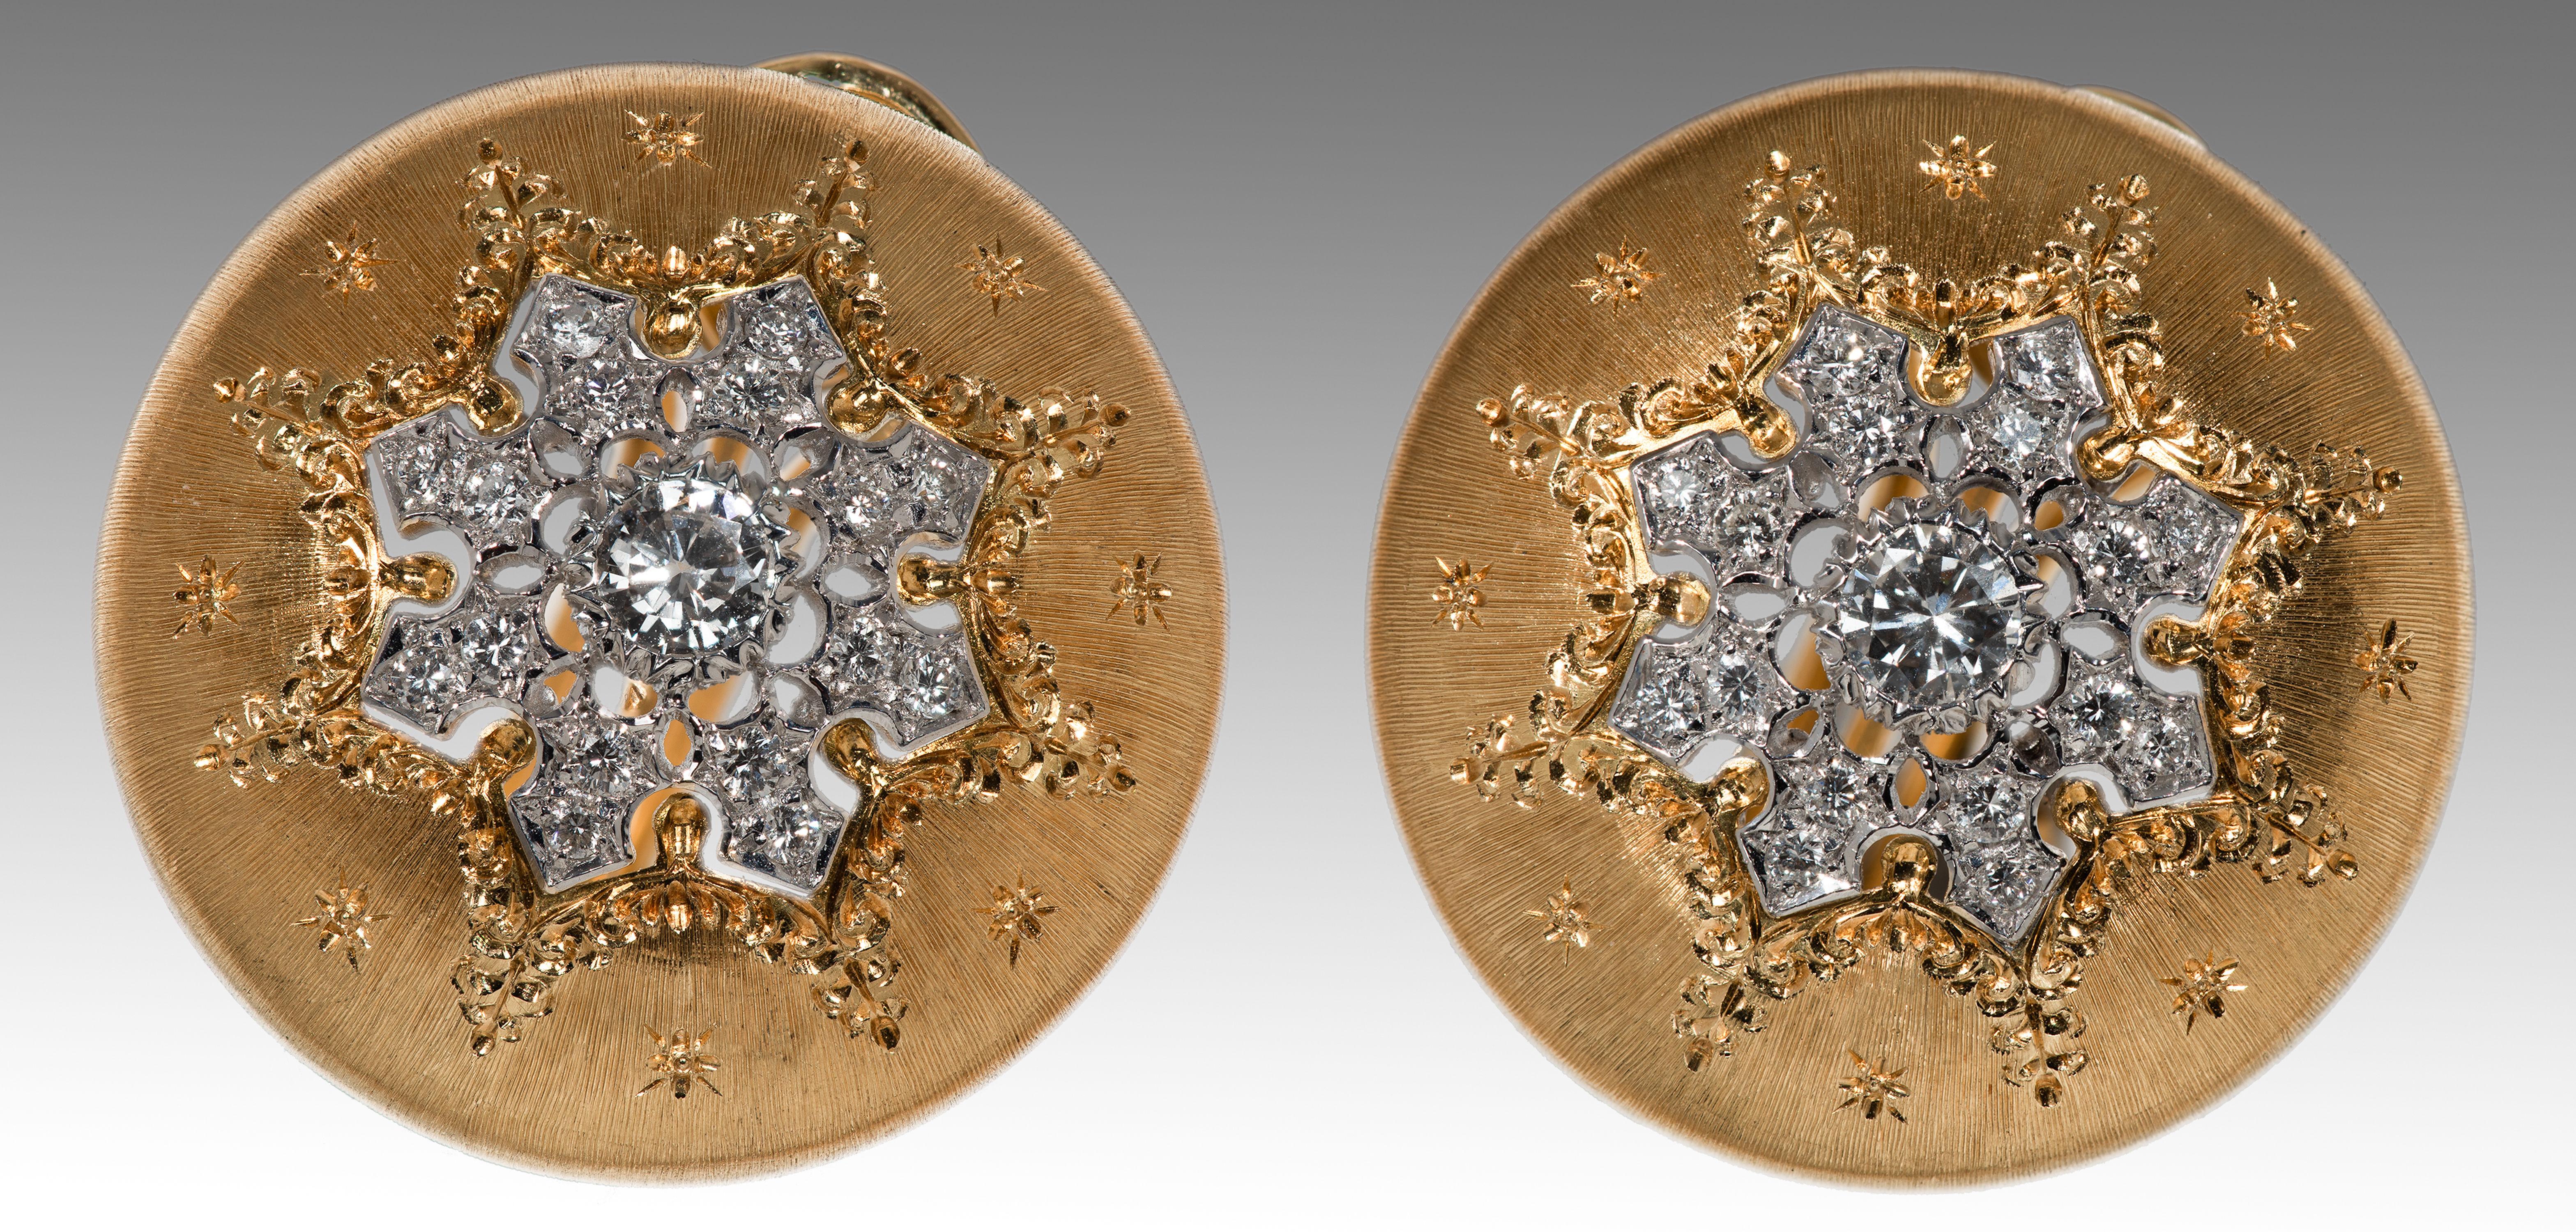 These generously proportioned earrings are a classic design from this revered Italian master jeweler. Enhanced by their signature texture-engraving, the 18k yellow gold discs are centered with brilliant-cut diamonds in a starburst pattern.